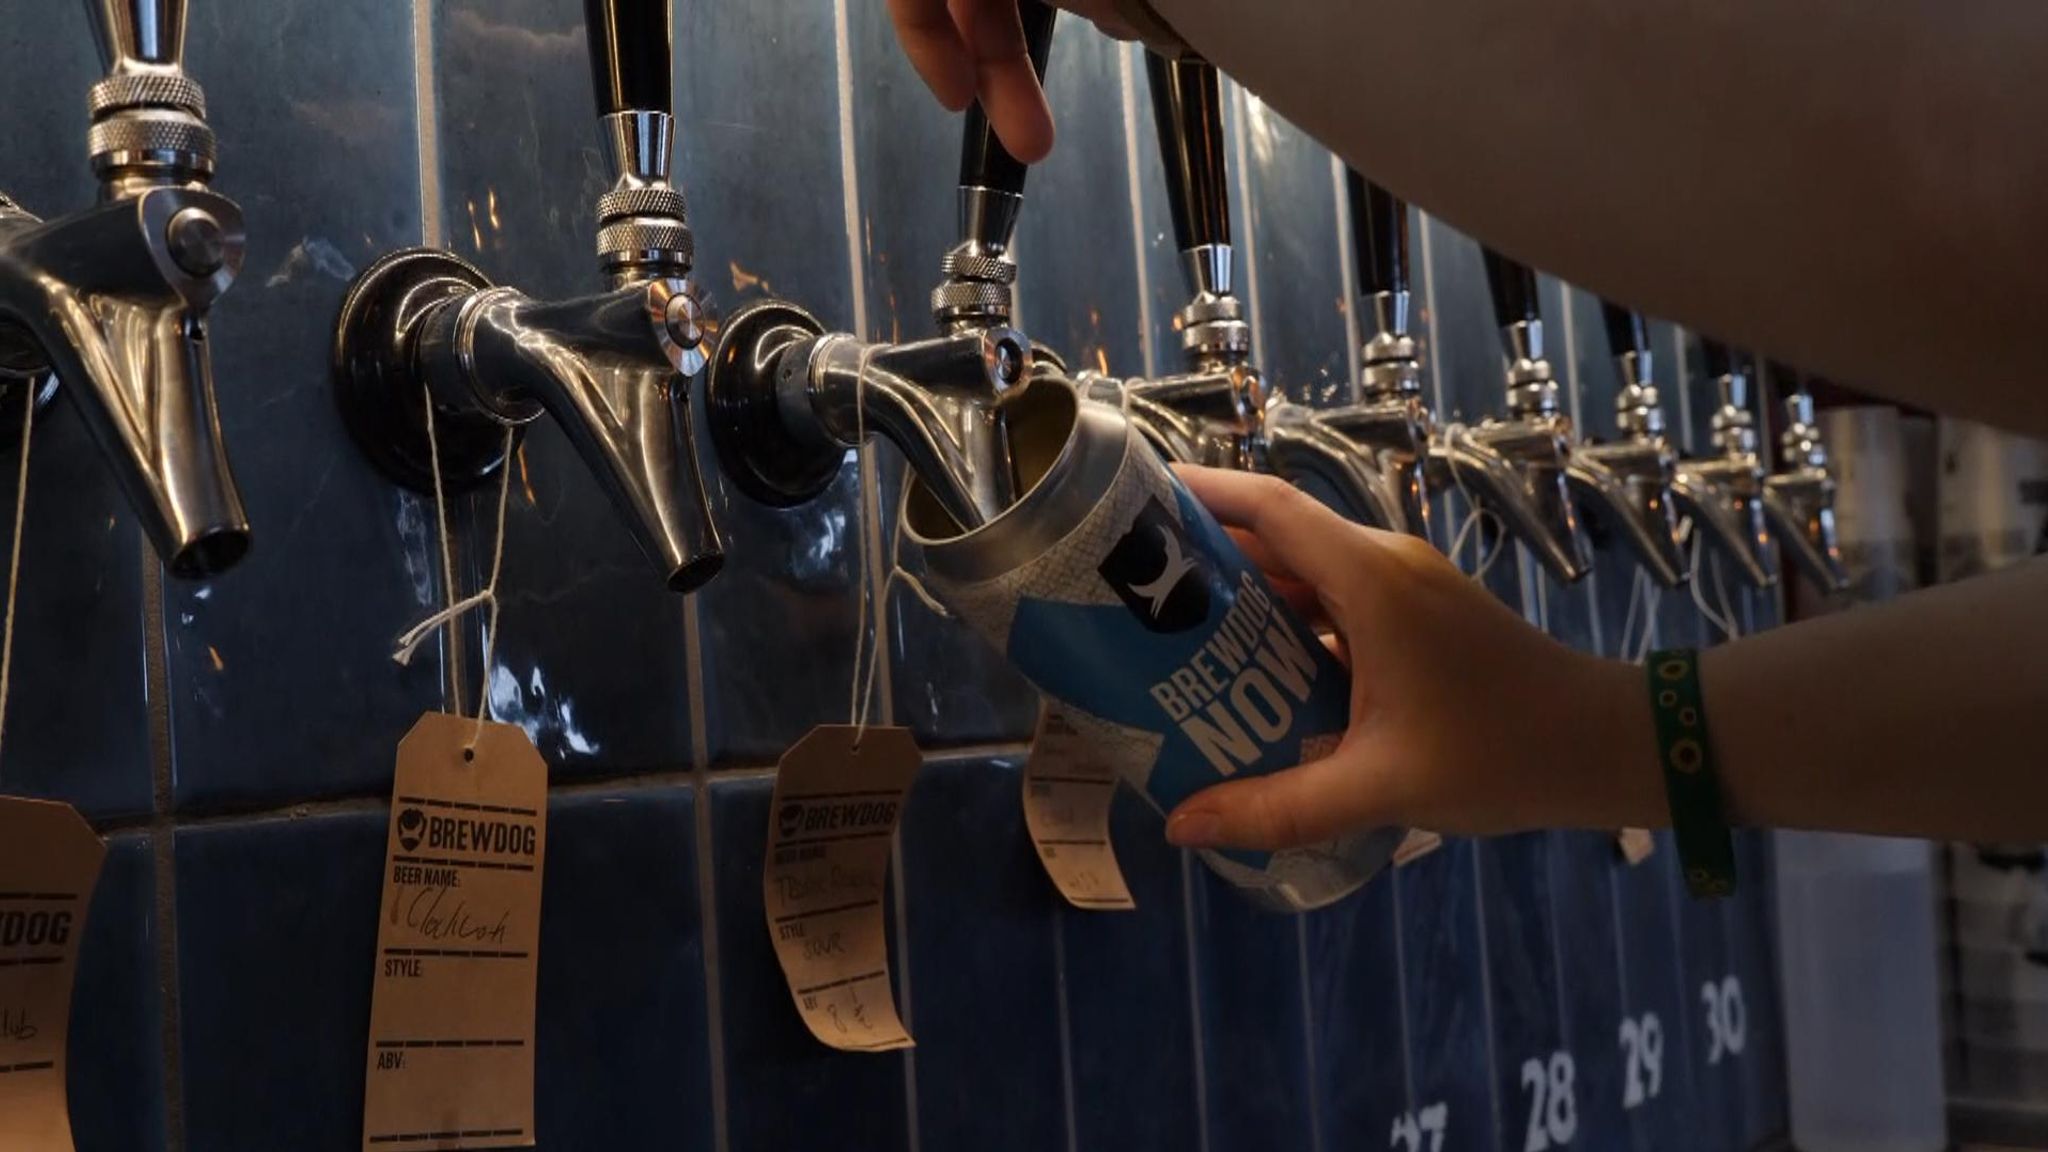 Hackers could have stolen beer from BrewDog using bug that exposed details of 200,000 shareholders